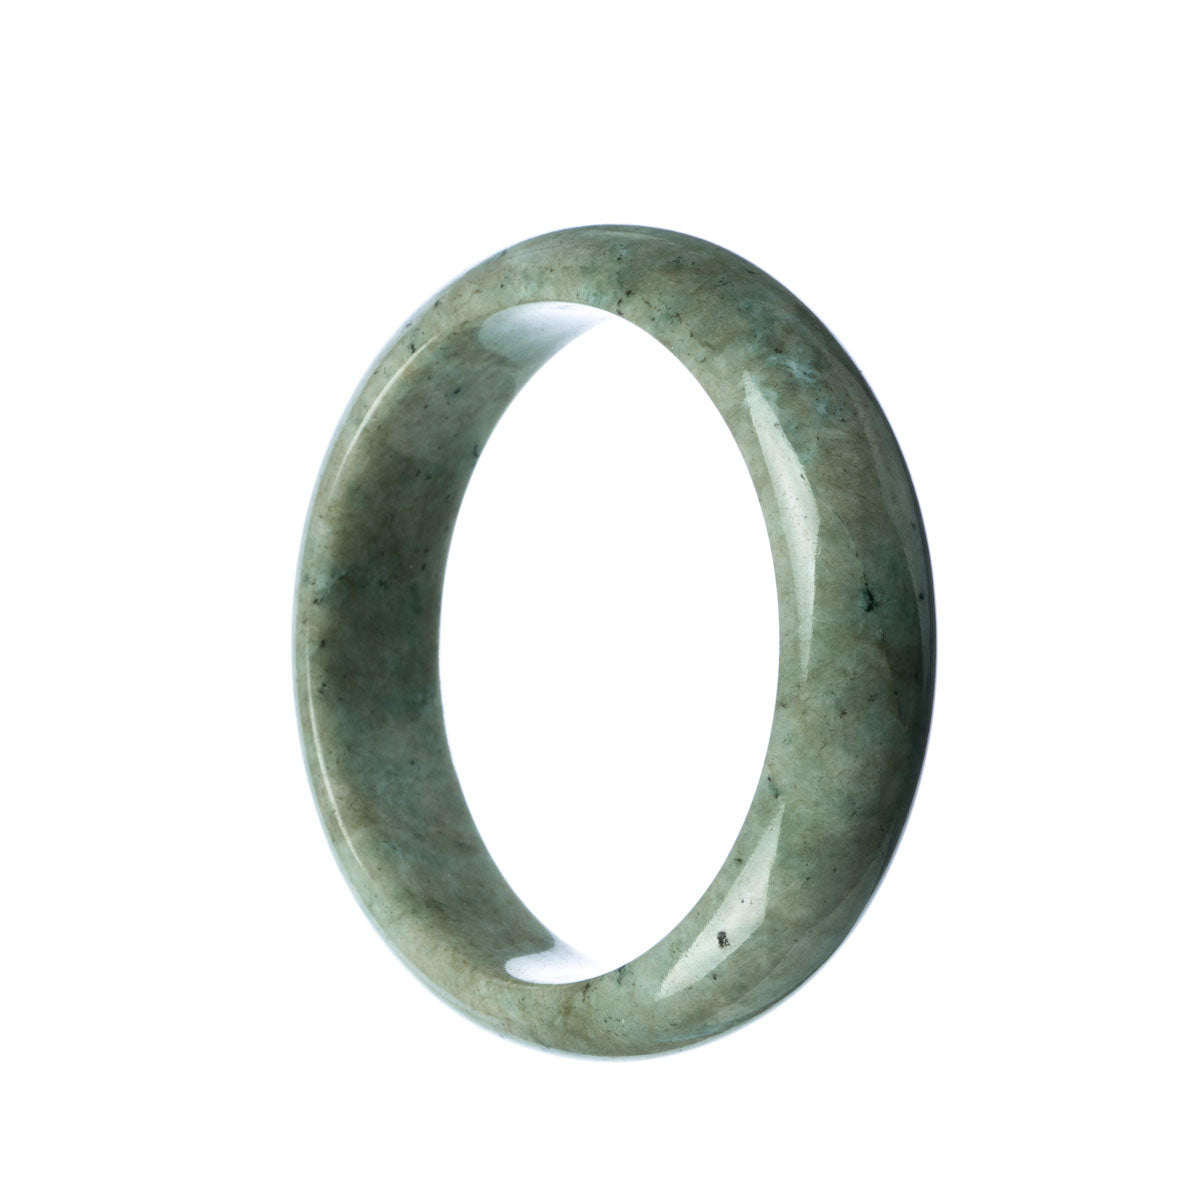 A pale green jade bangle bracelet with a traditional half-moon design, measuring 59mm in size.